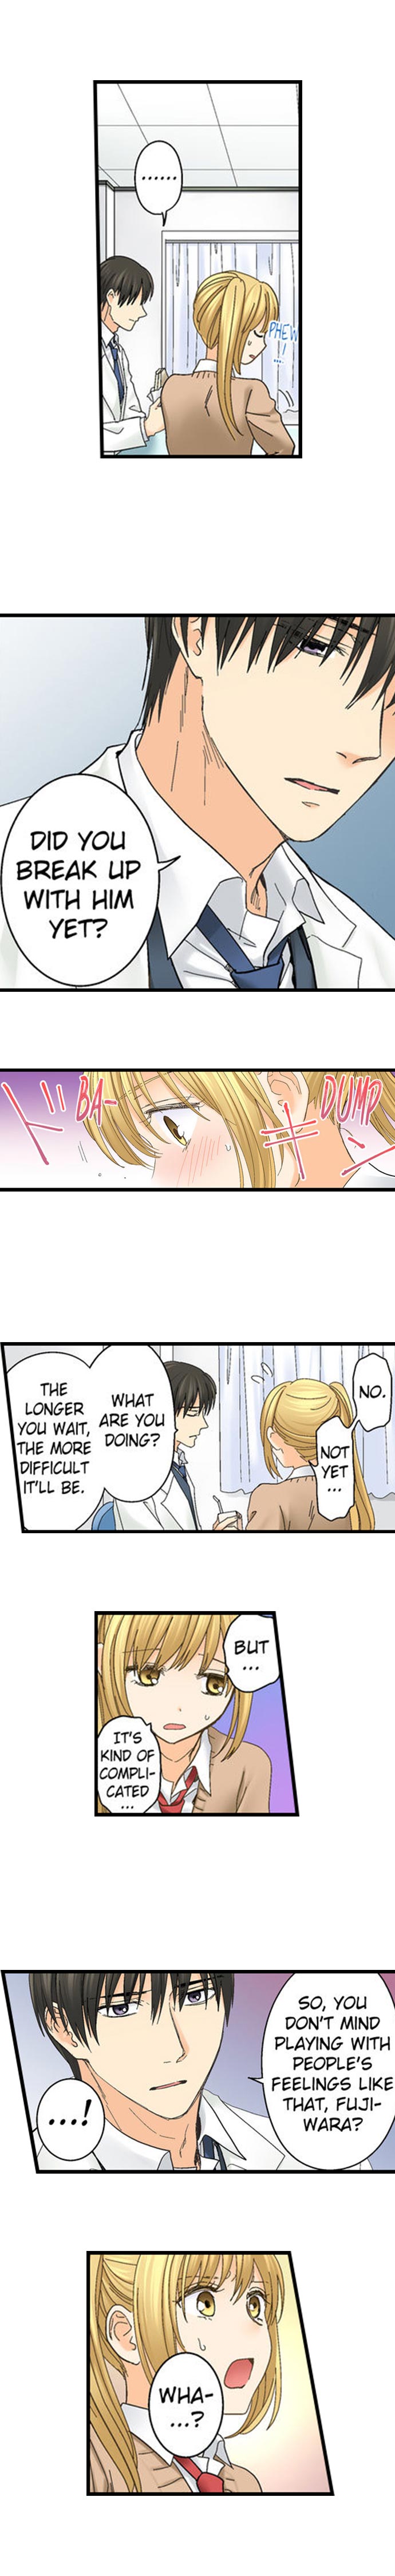 Running a Love Hotel with My Math Teacher - Chapter 60 Page 6